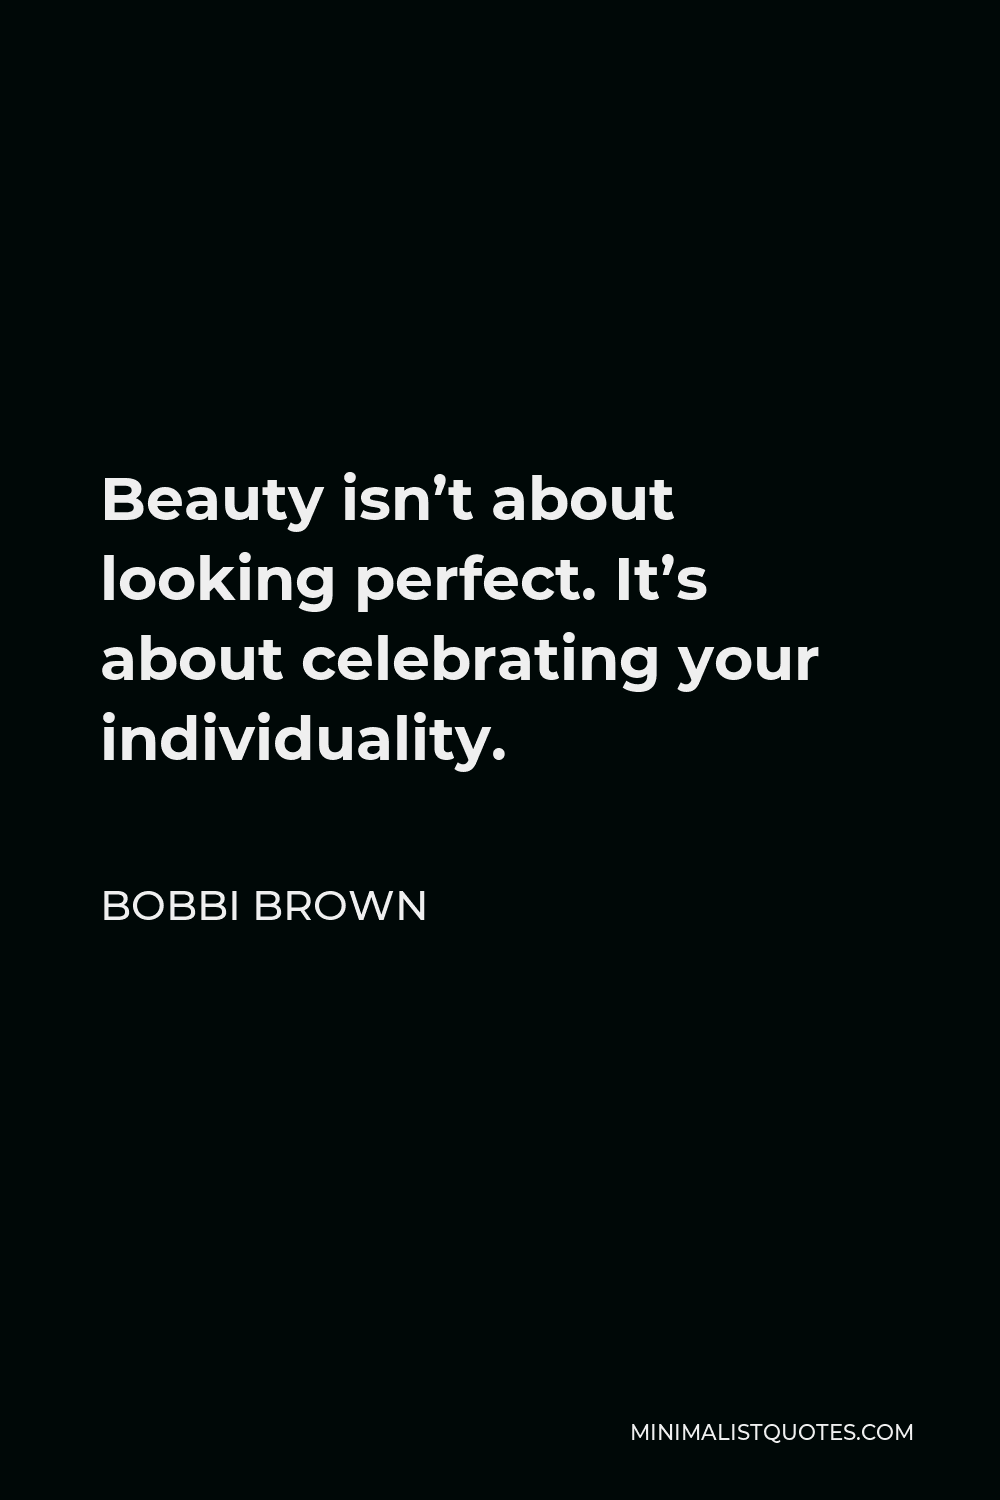 Bobbi Brown Quote - Beauty isn’t about looking perfect. It’s about celebrating your individuality.